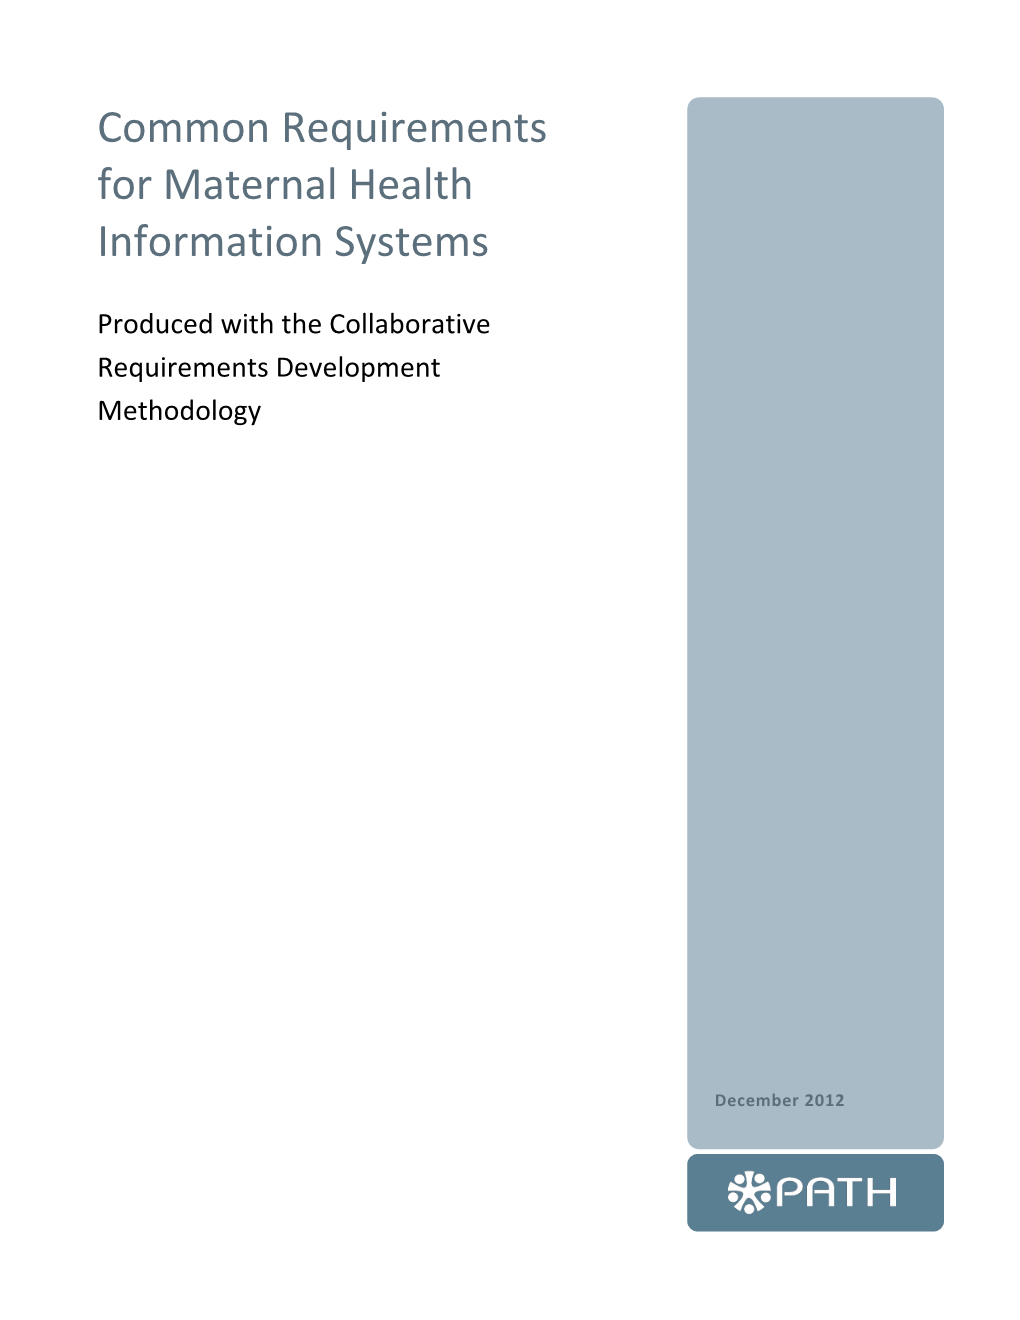 Common Requirements for Maternal Health Information Systems